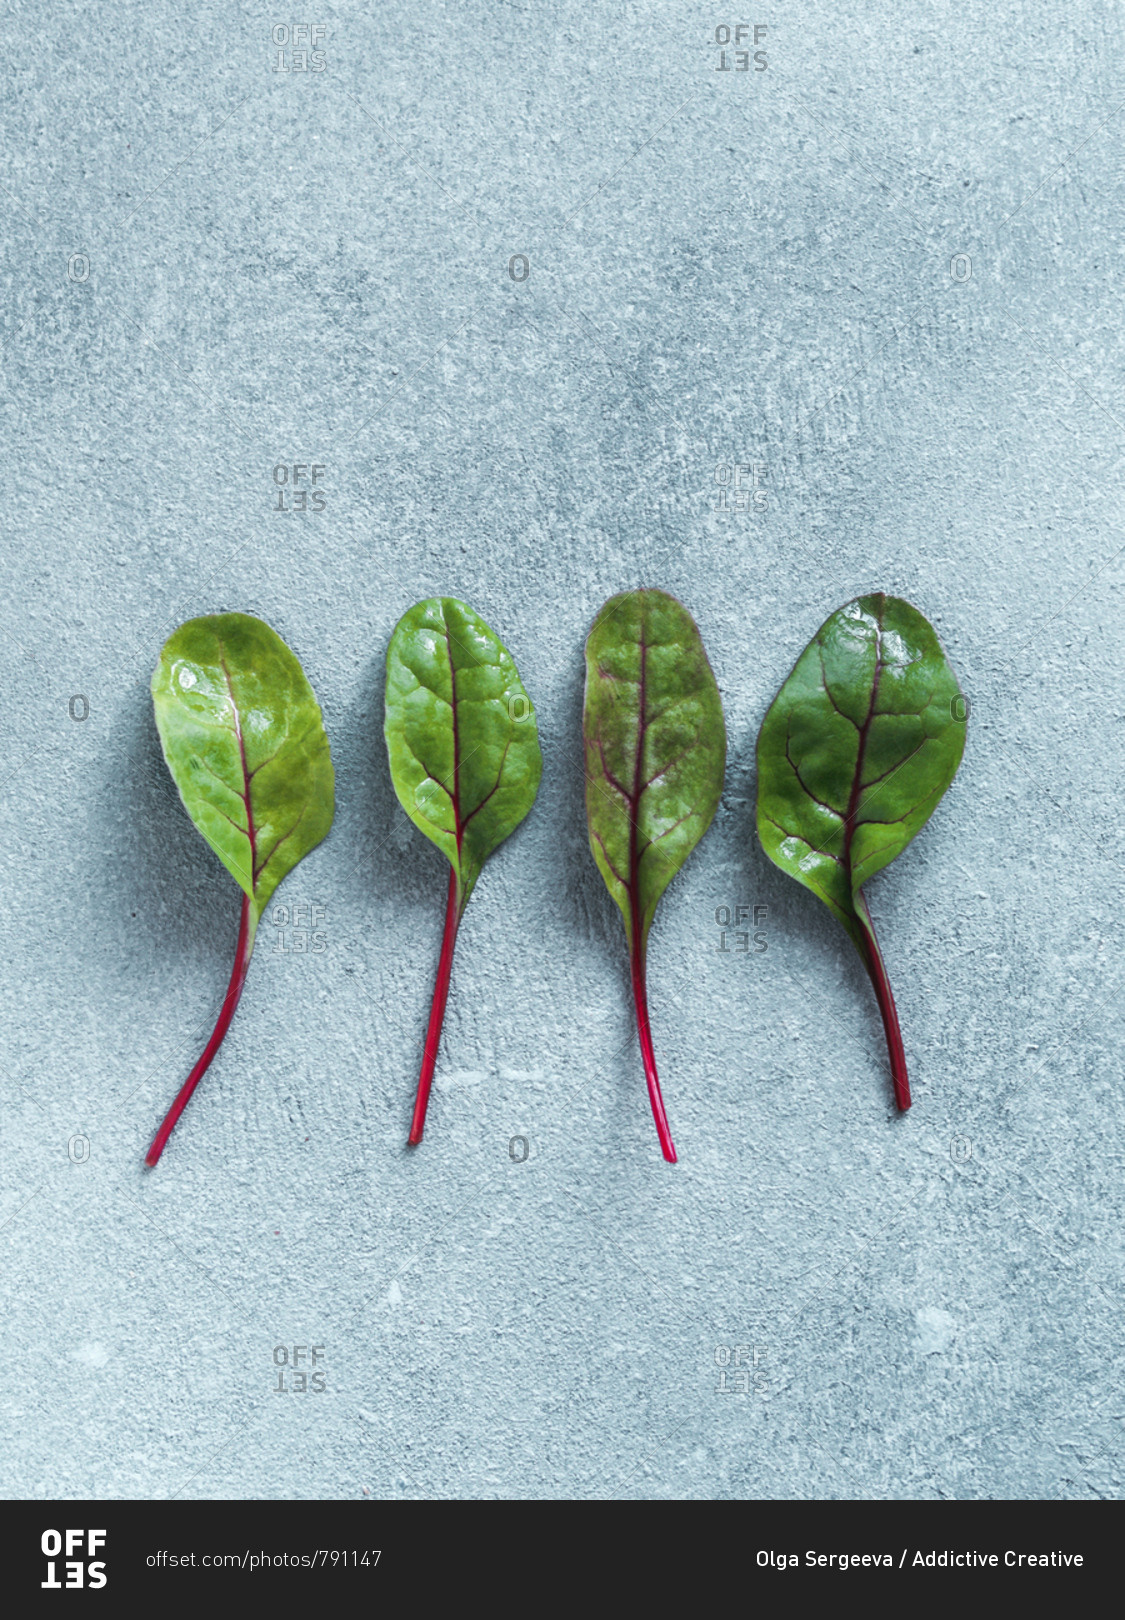 Set of four fresh green chard leaves or mangold salad leaves on gray stone background. Flat lay or top view fresh baby beet leaves. Vertical.